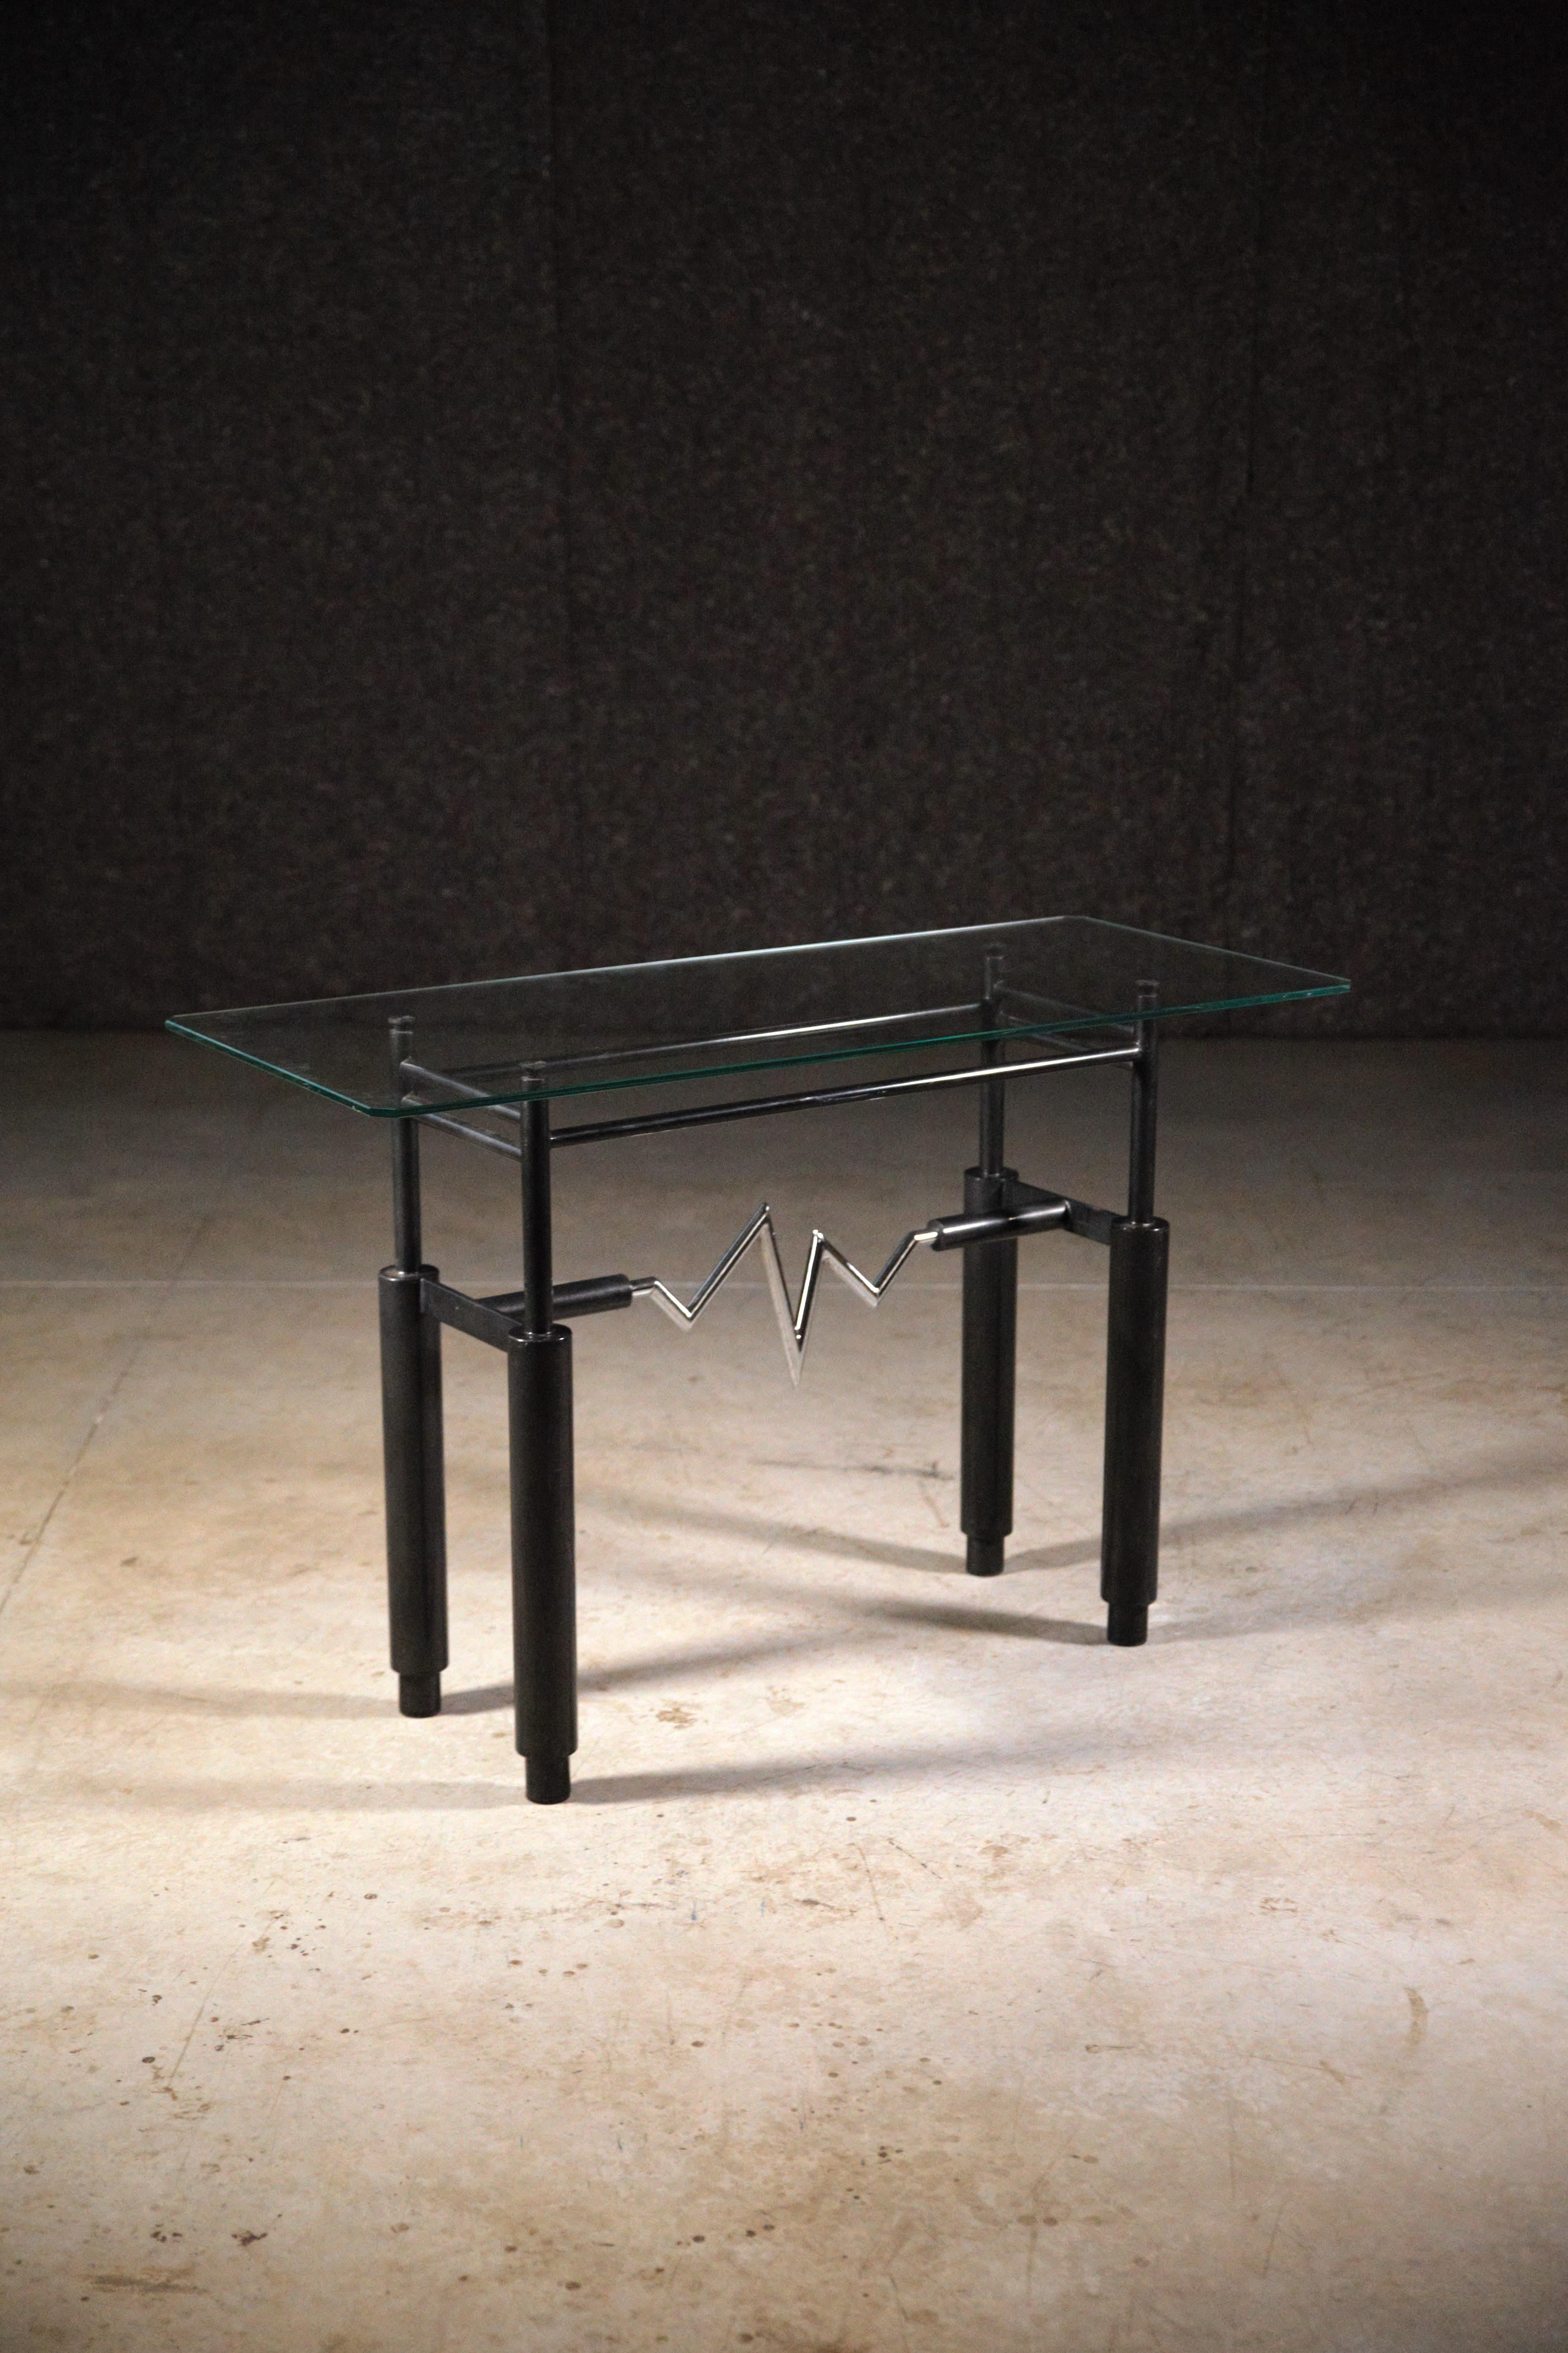 A console table by Leopold Gest France 1985.

Made in small number pieces.

Typical design from the 80s.